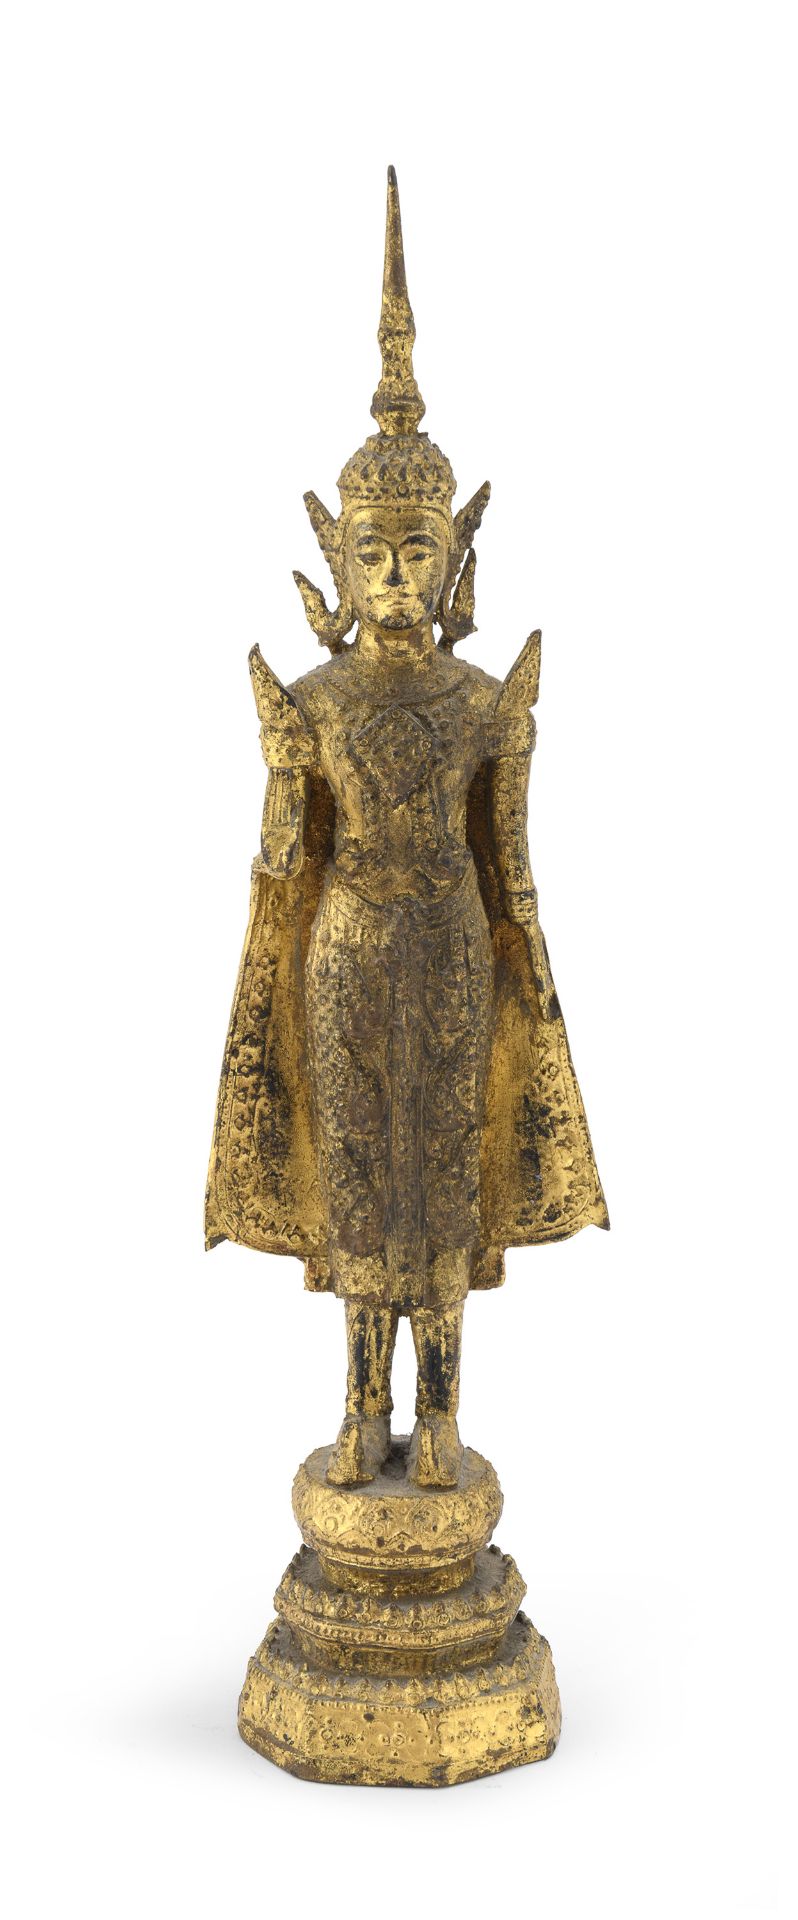 GILT BRONZE SCULPTURE THAILAND LATE 19TH EARLY 20TH CENTURY